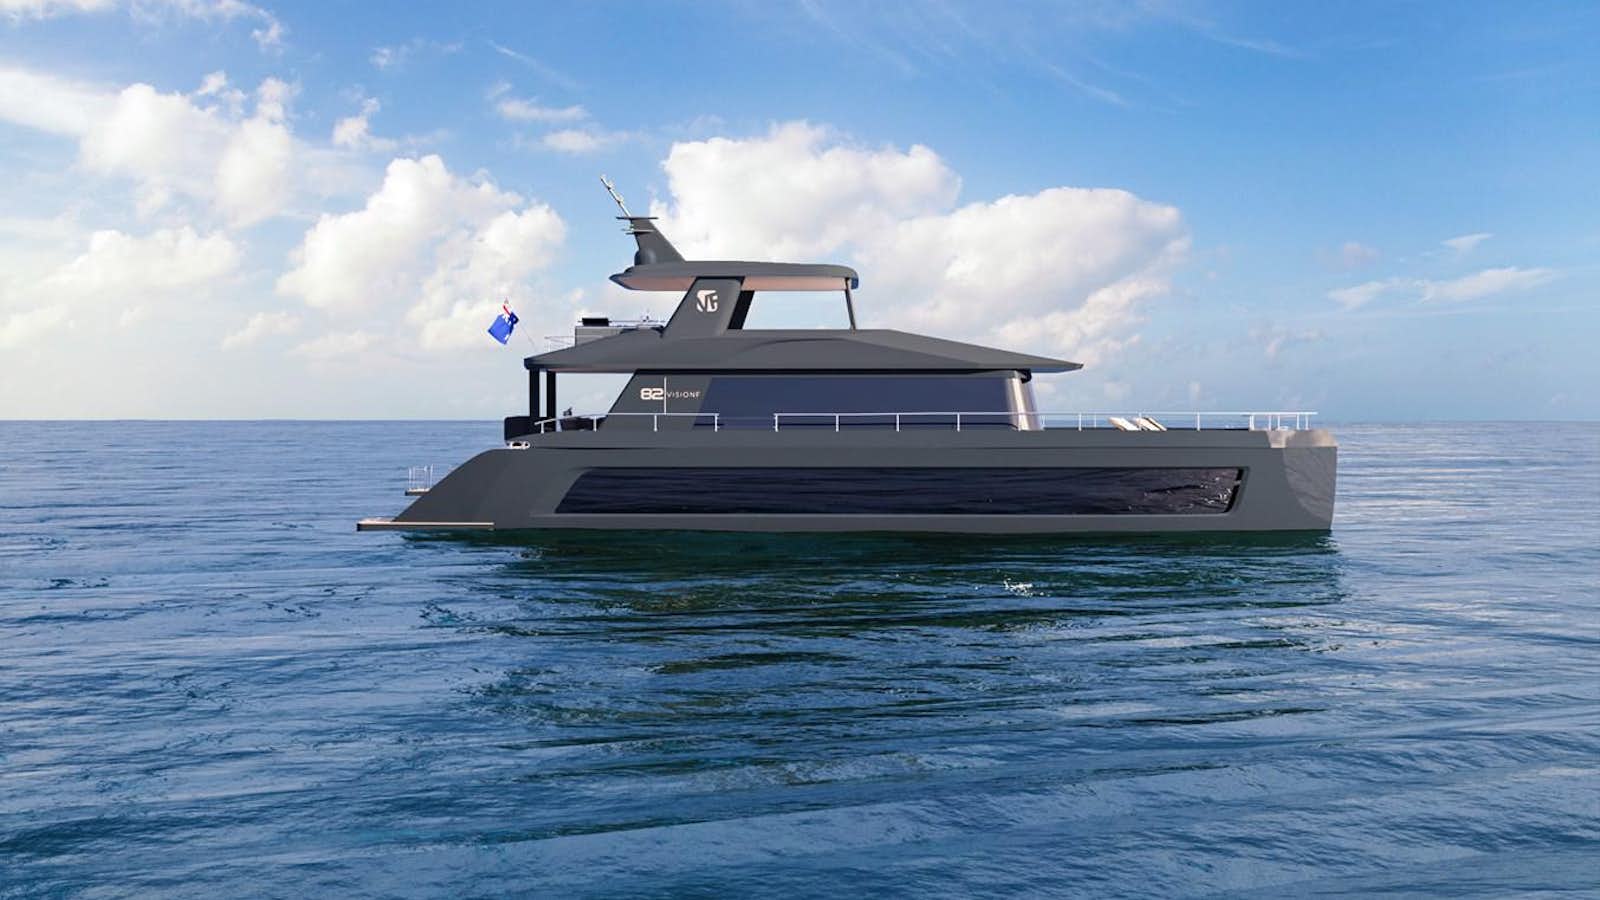 Vision f 82alu
Yacht for Sale